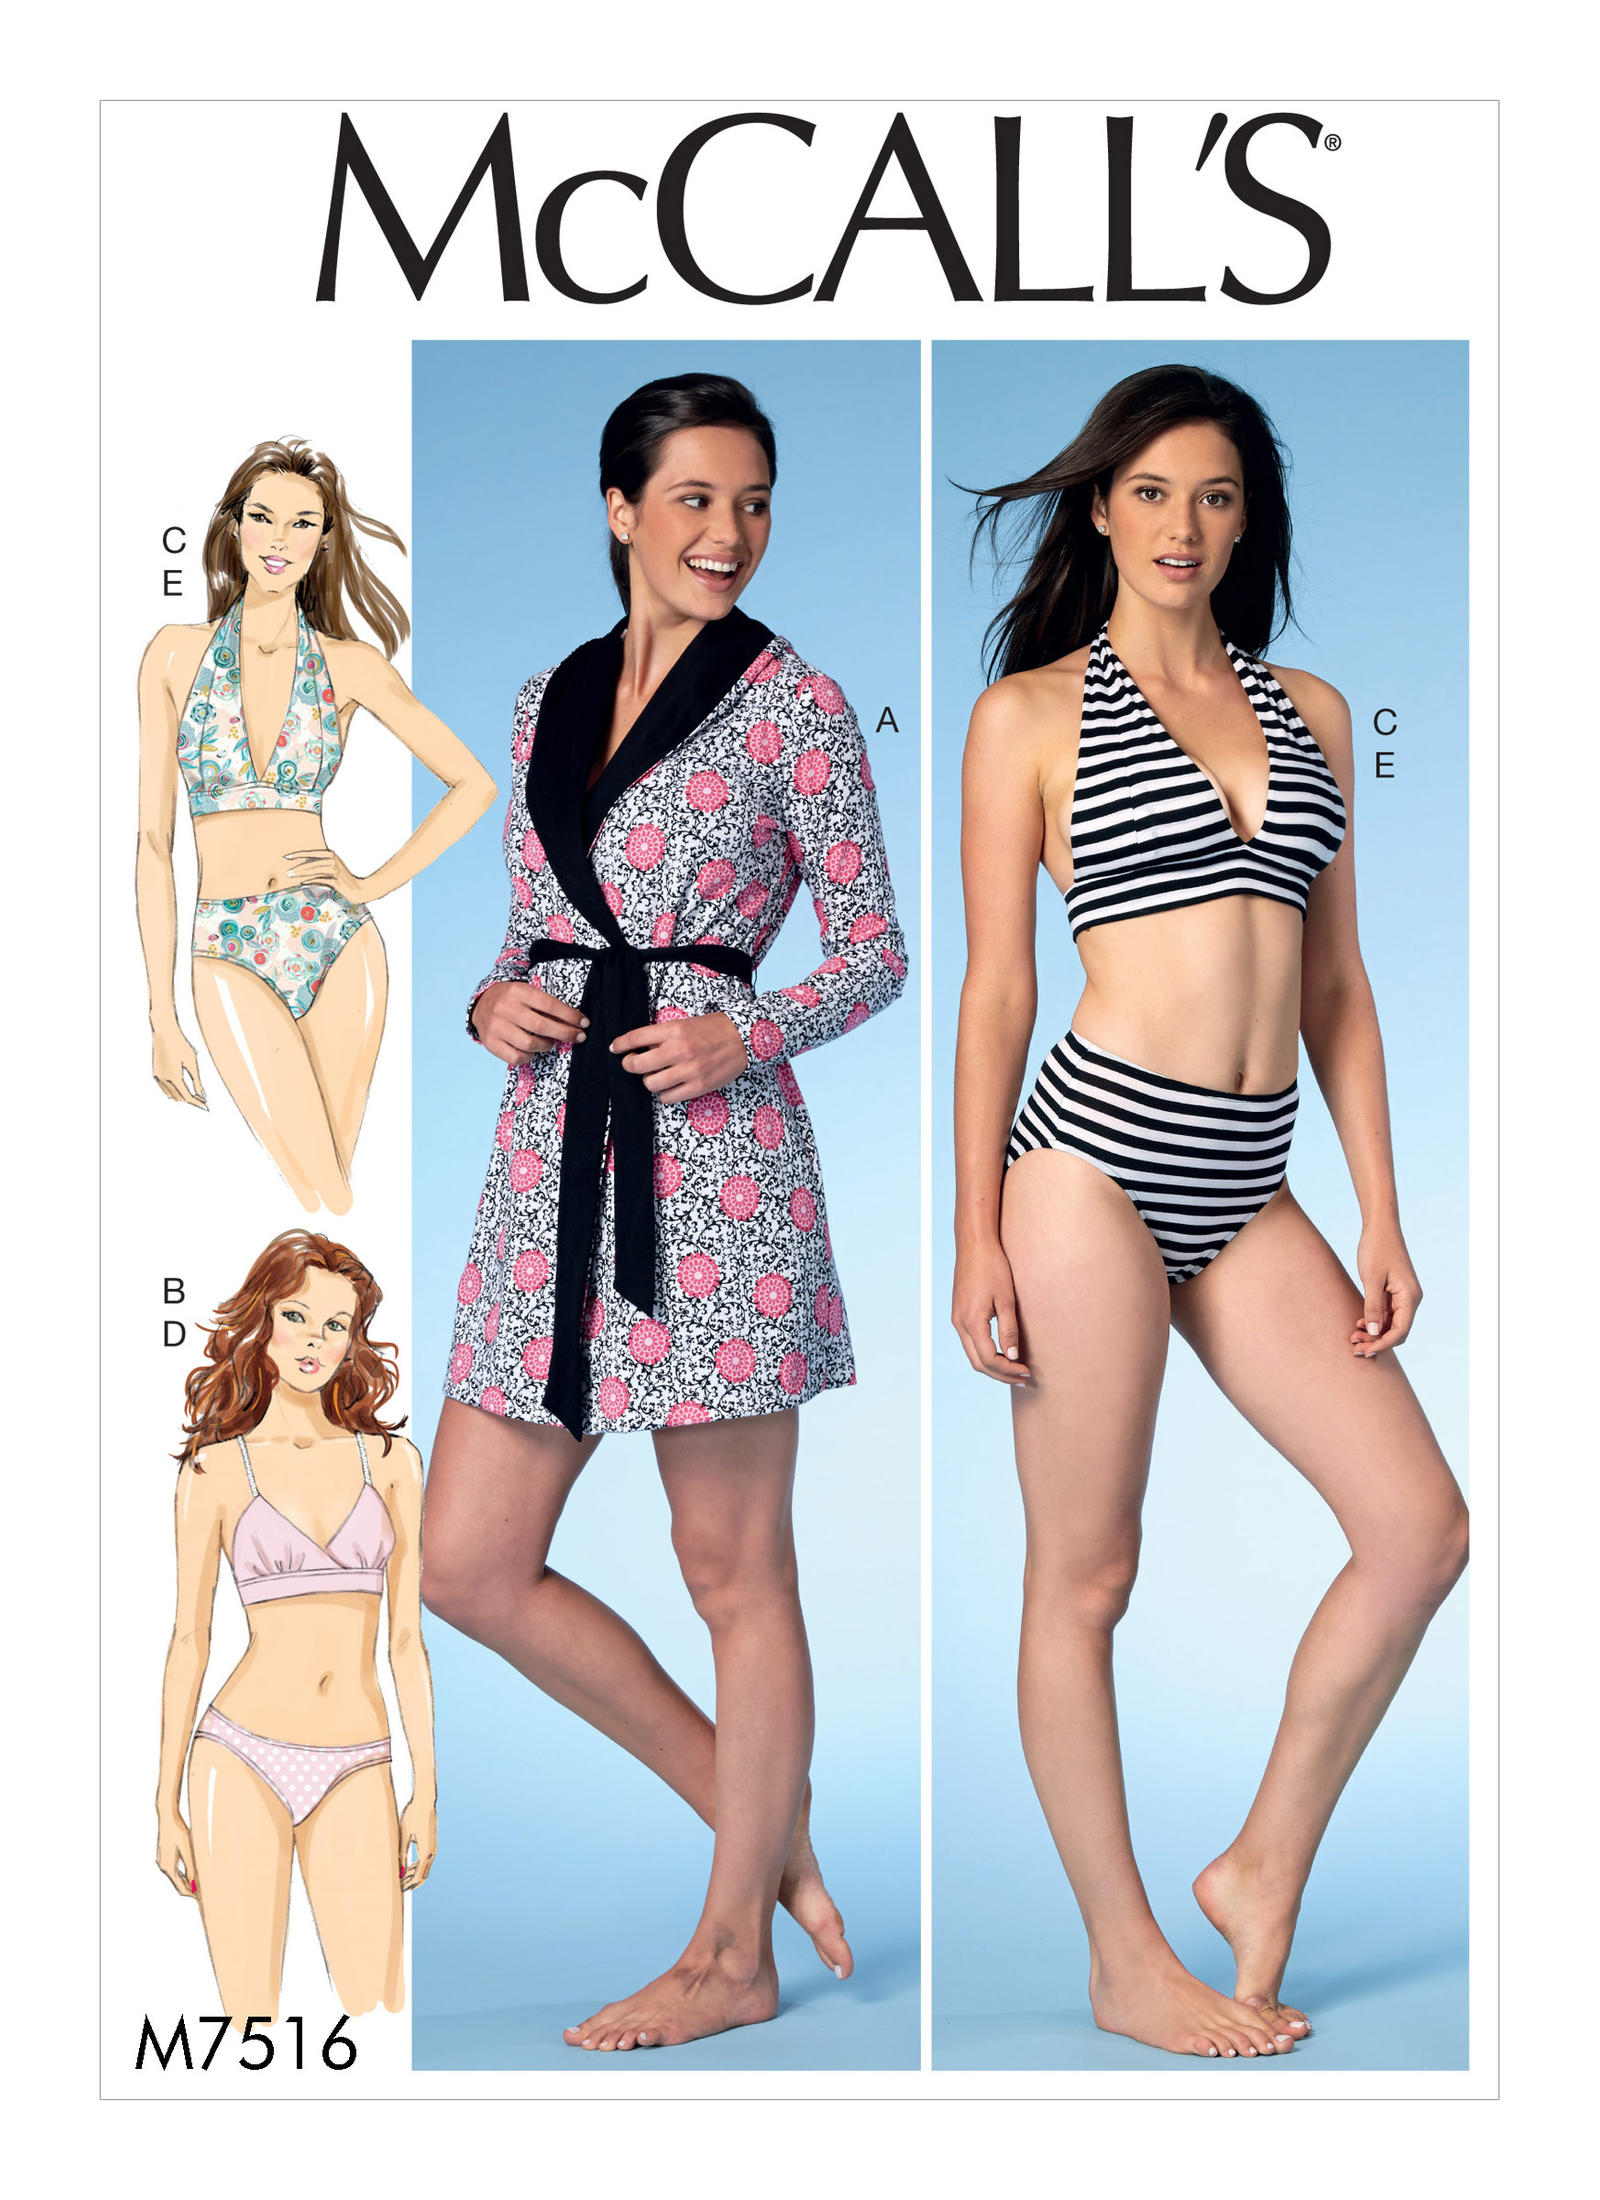 McCall's 7516 Misses' Robe with Hood, Belt, T-Back or Halter Bras, and  Panties